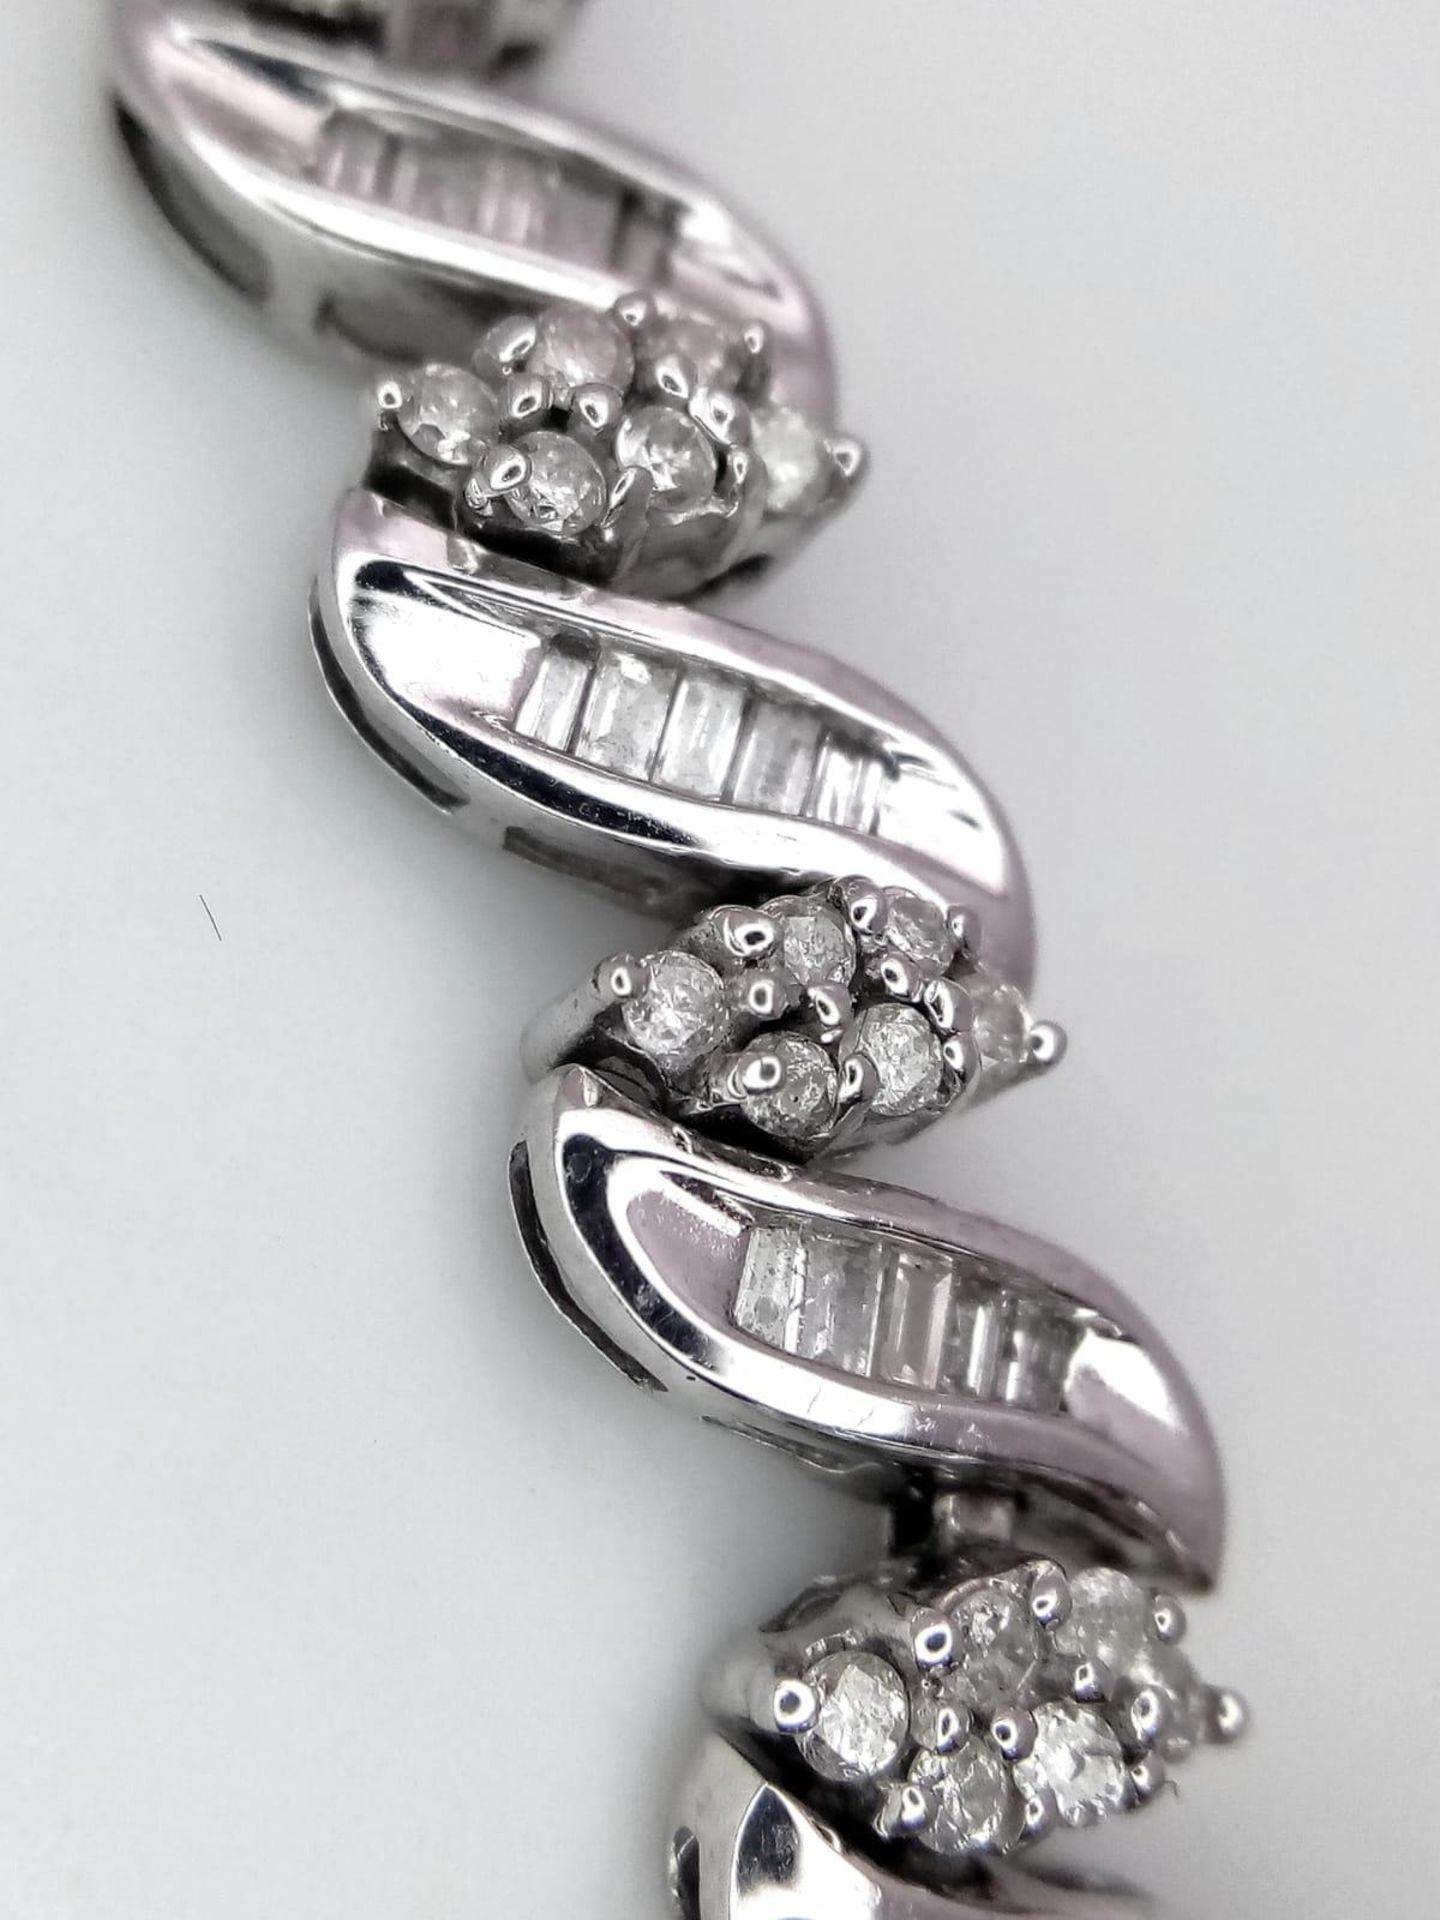 A 14K WHITE GOLD DIAMOND SWIRL BRACELET. A COMBINATION OF BAGUETTE AND ROUND CUT DIAMONDS 2.30CT - Image 2 of 7